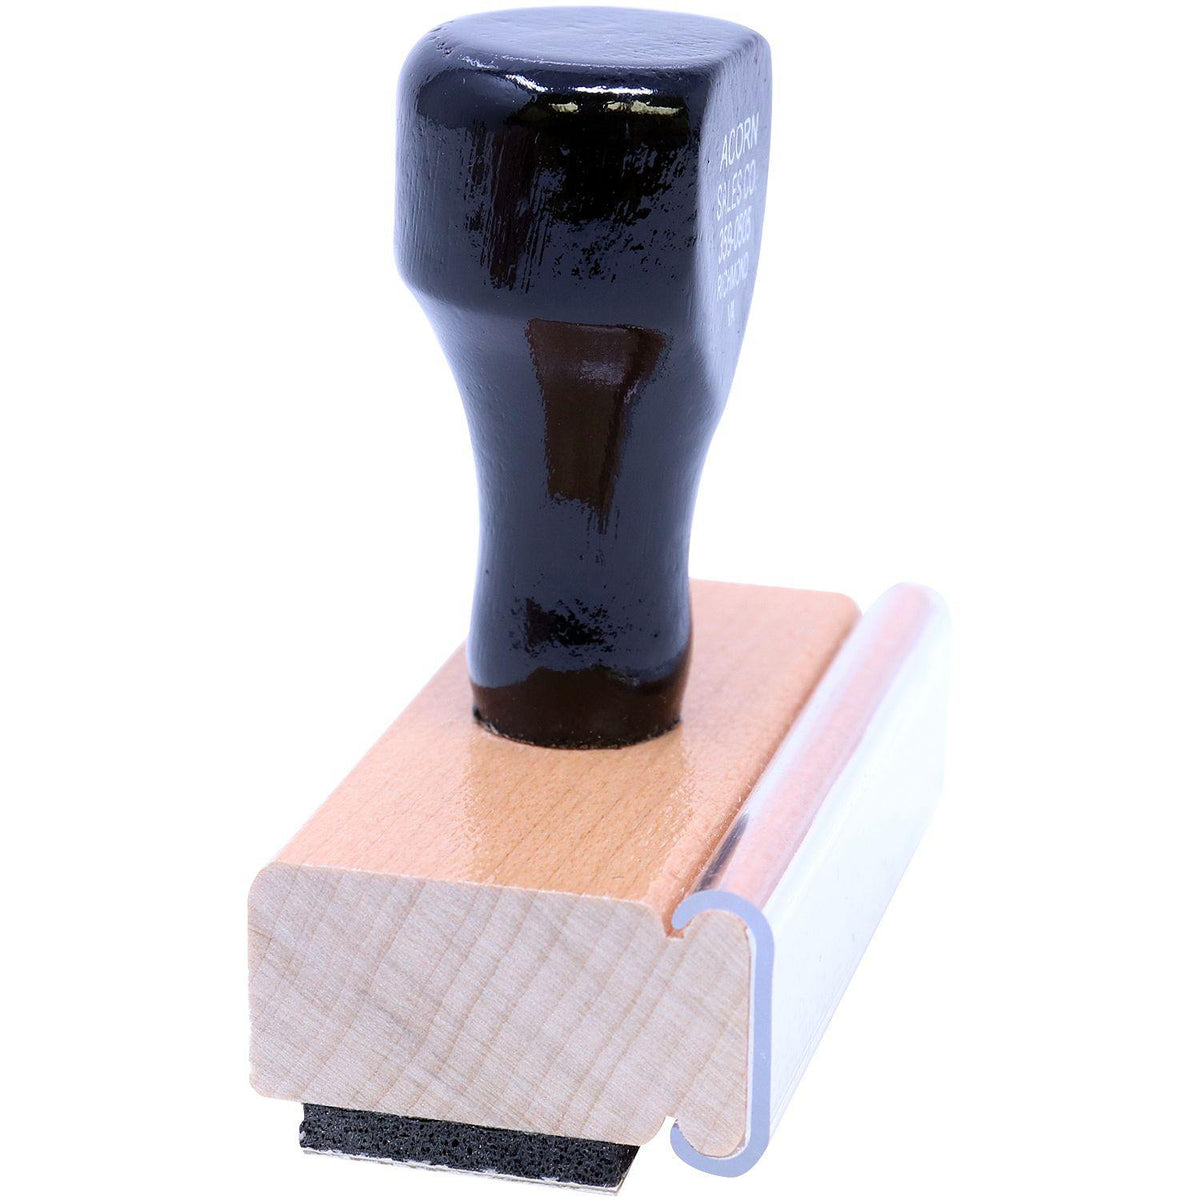 Side View of Large Preliminary As Built Rubber Stamp at an Angle